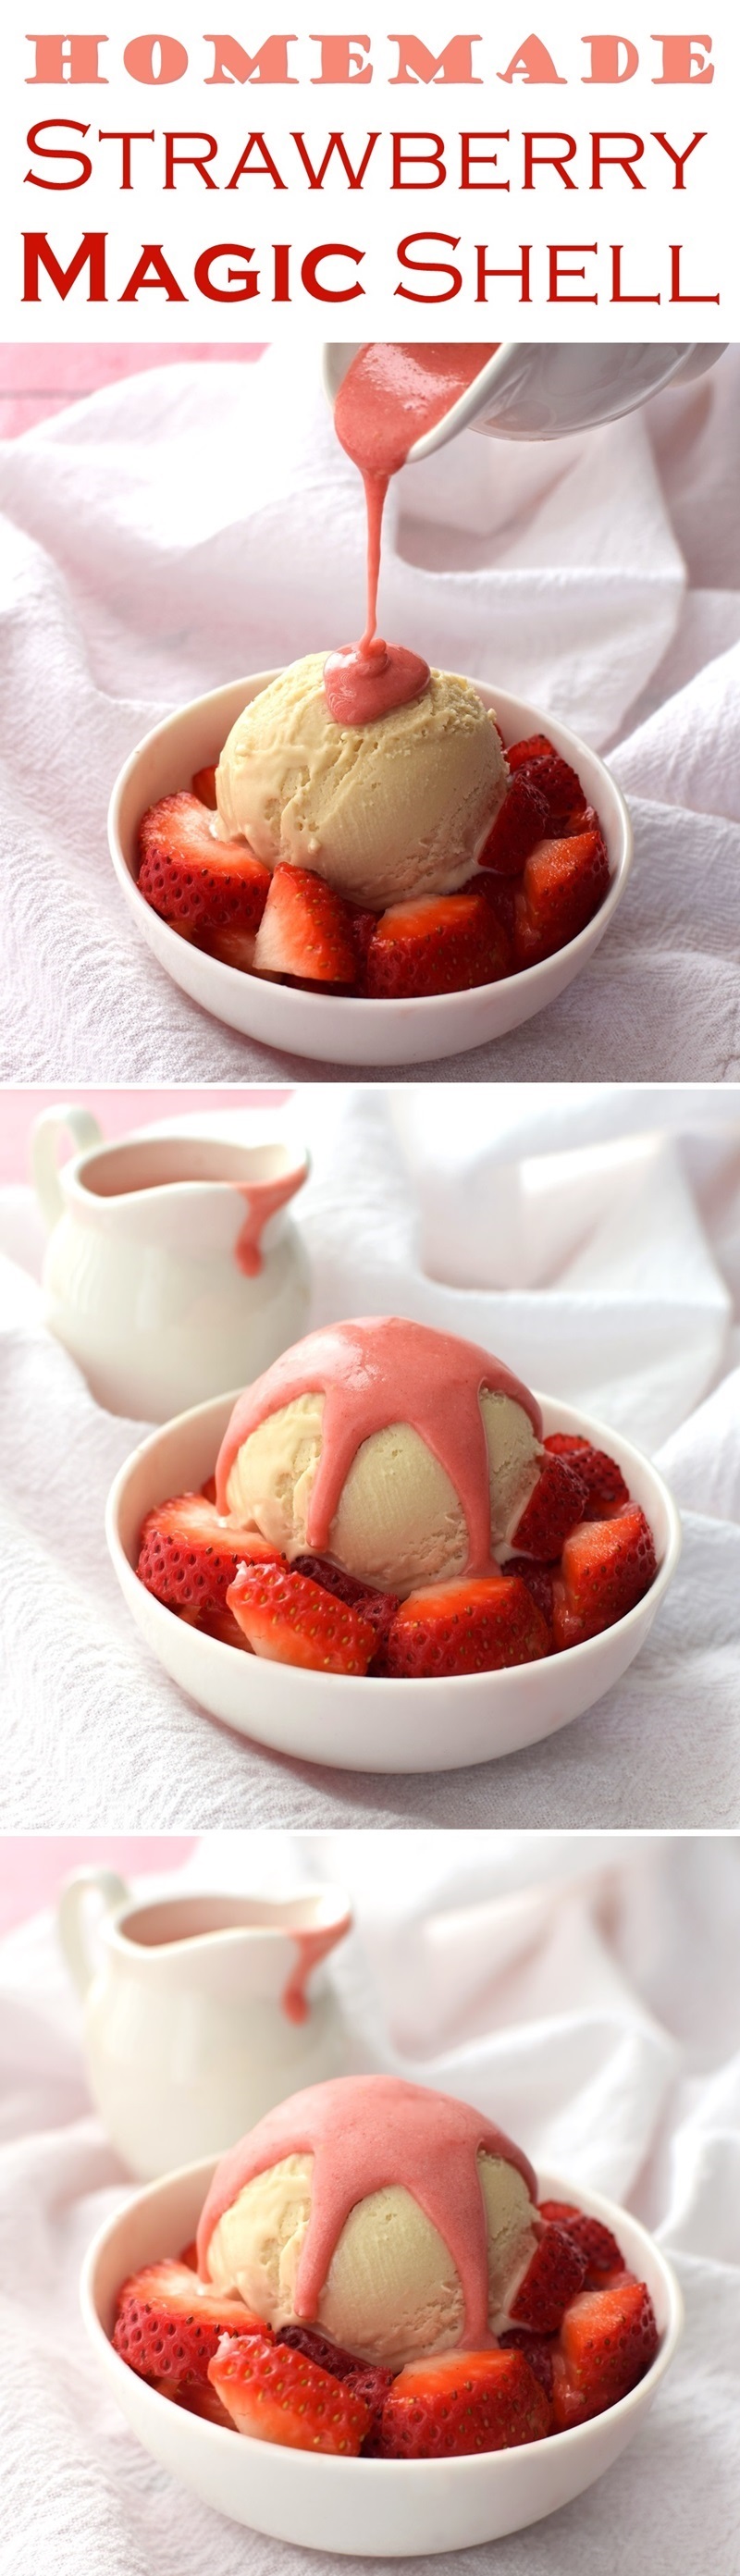 Homemade Strawberry Magic Shell! The easy, 5-minute recipe is dairy-free, gluten-free, vegan and allergy-friendly